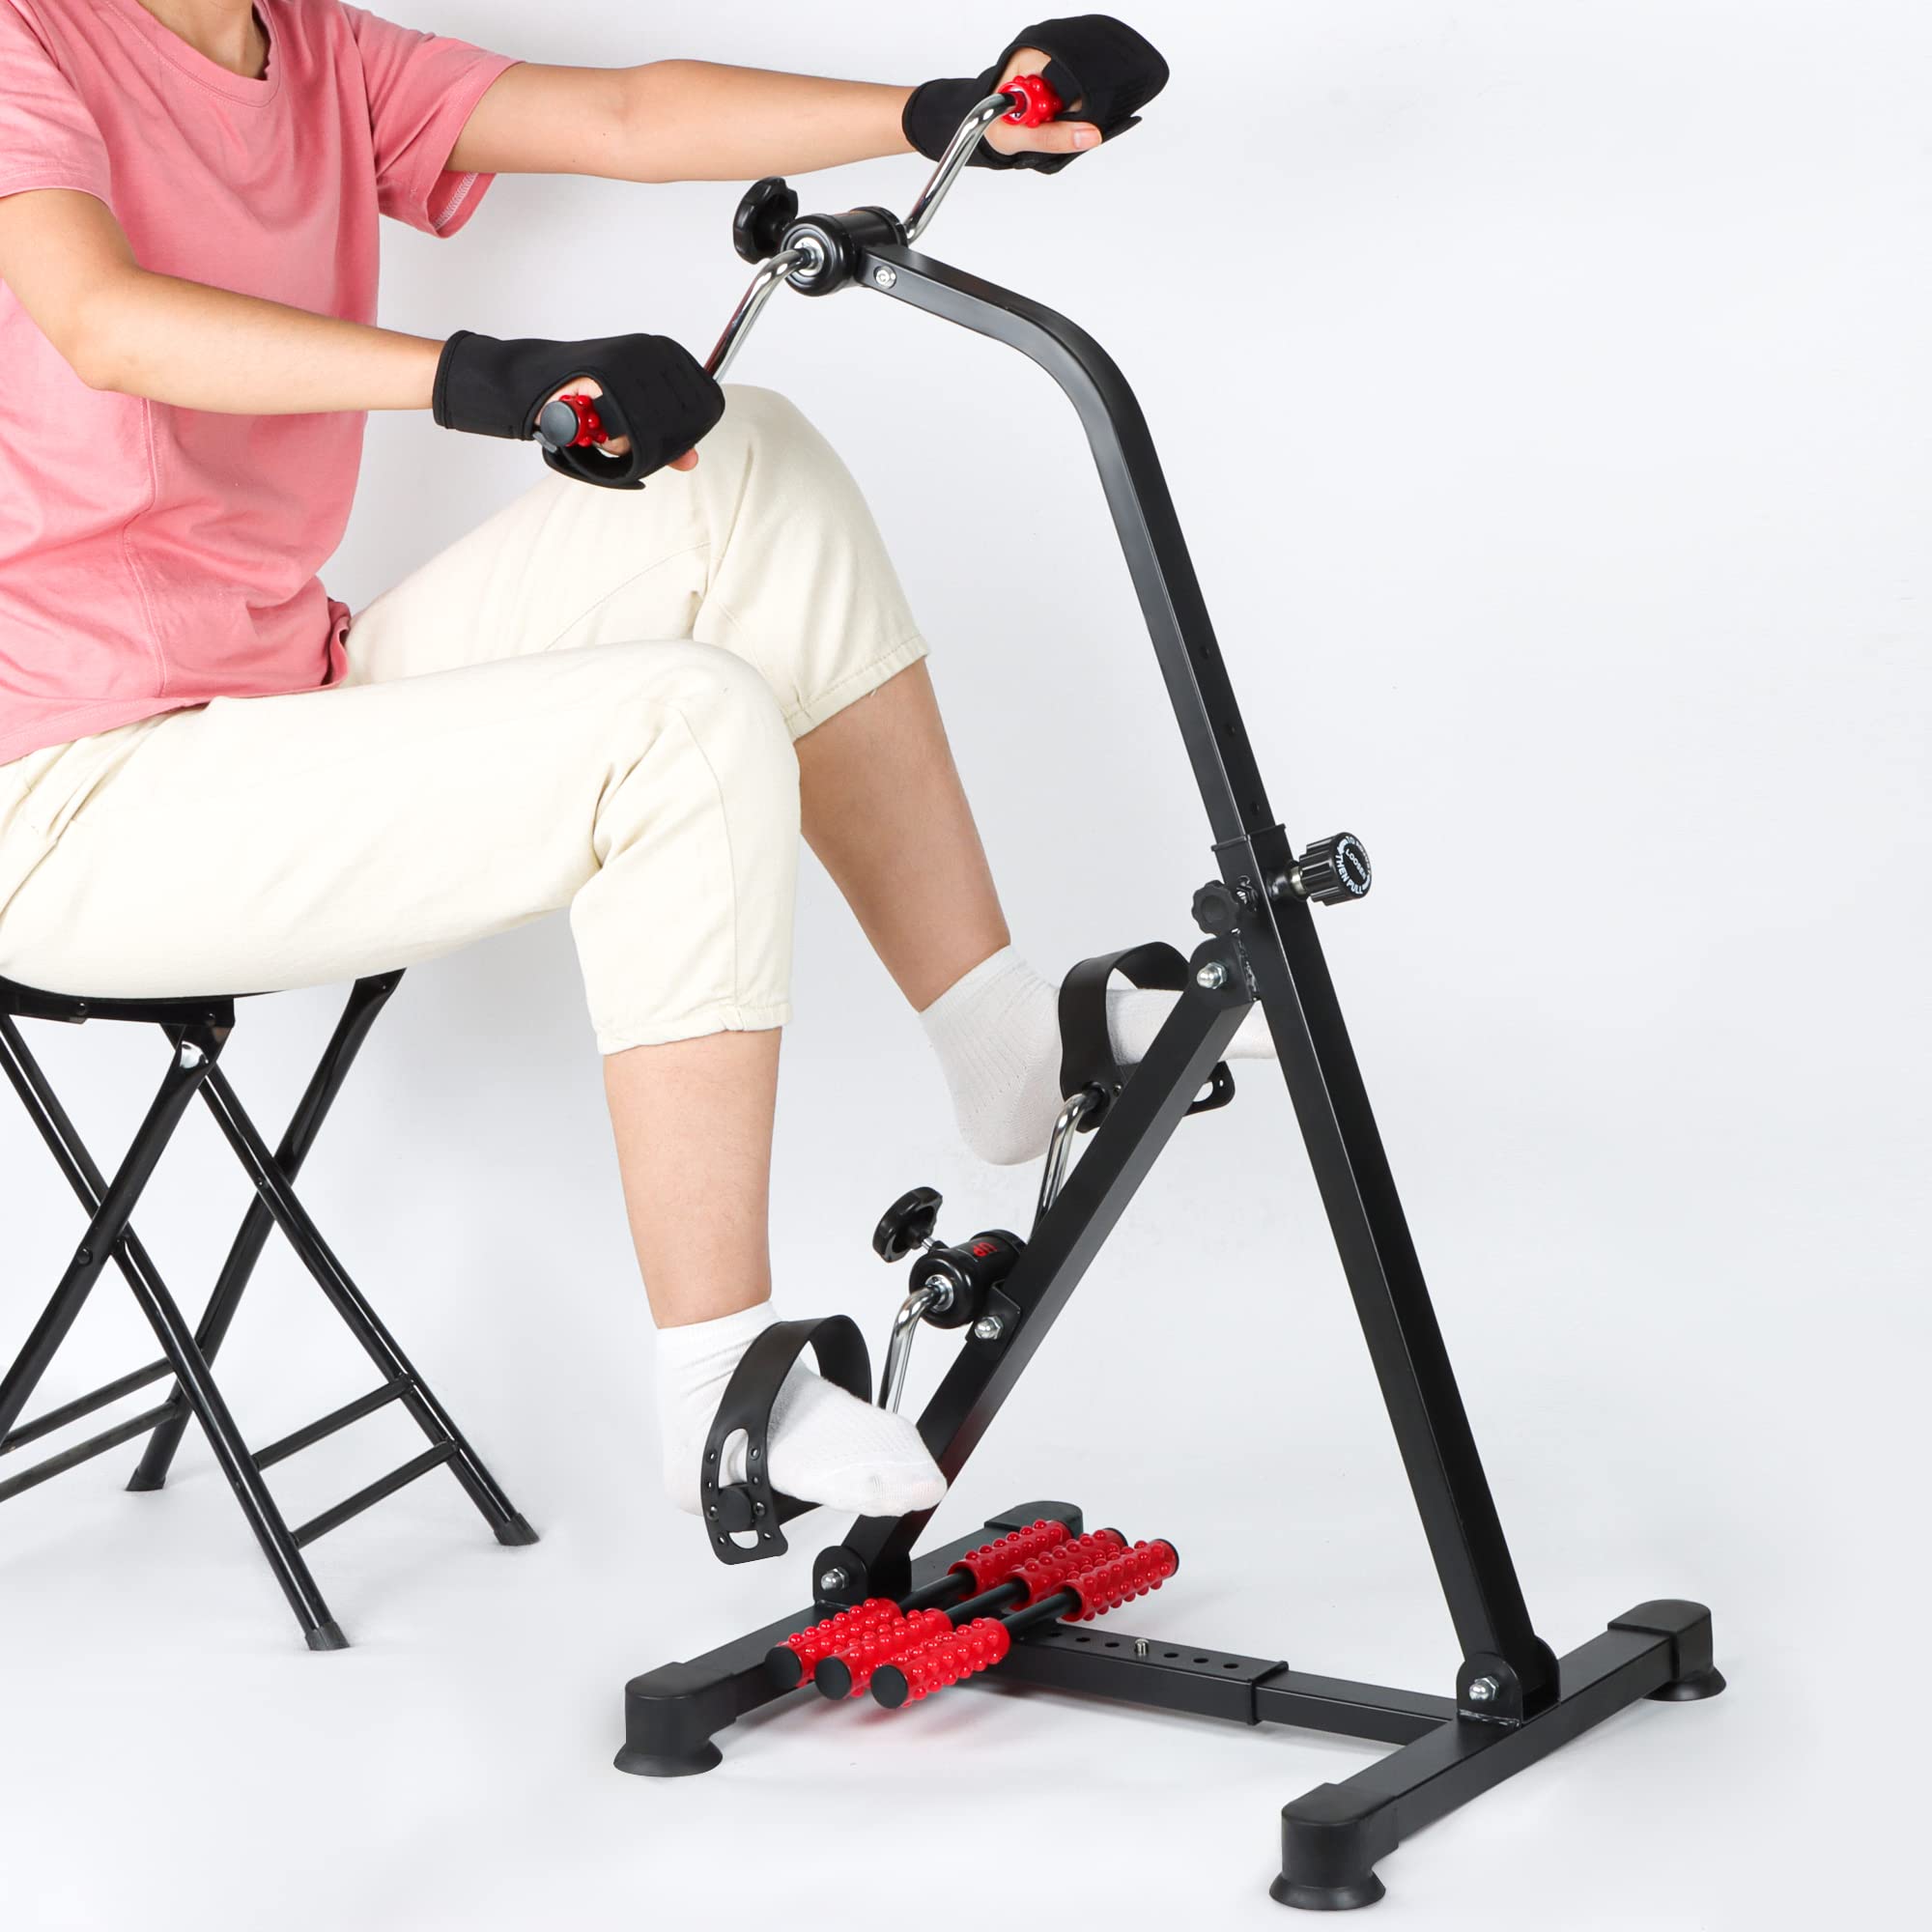 REAQER Pedal Exerciser Bike Hand Arm Leg and Knee Stroke Recovery Equipment for Seniors Elderly physical therapy sit exercis